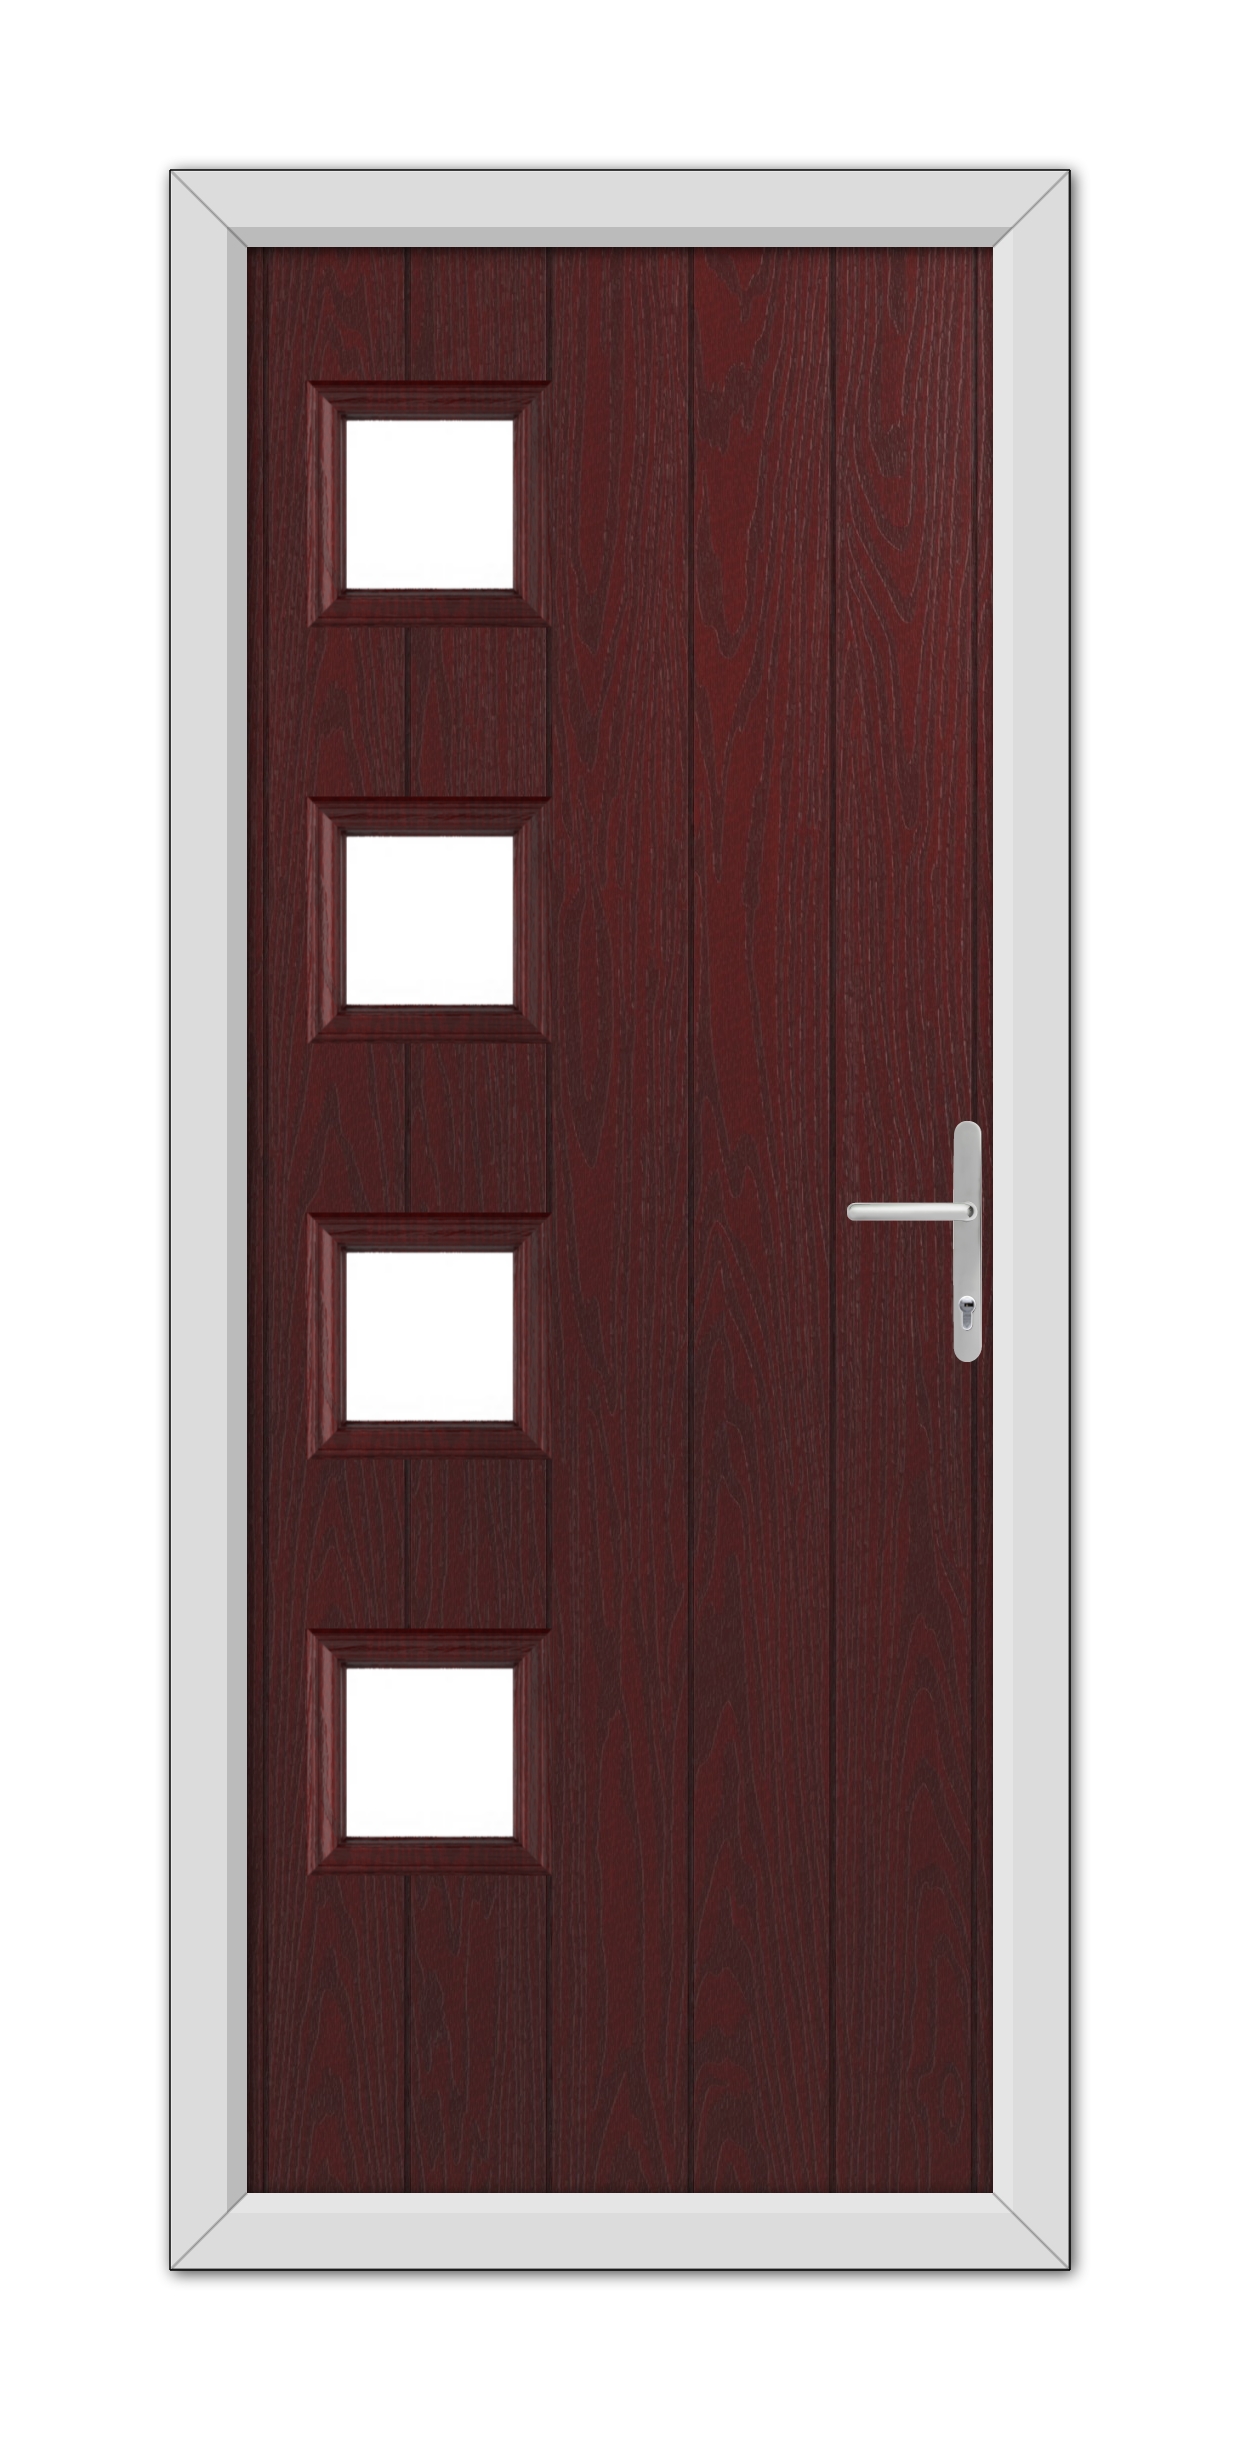 A modern Rosewood Sussex Composite Door with a white frame and silver handle, featuring six horizontal rectangular windows.